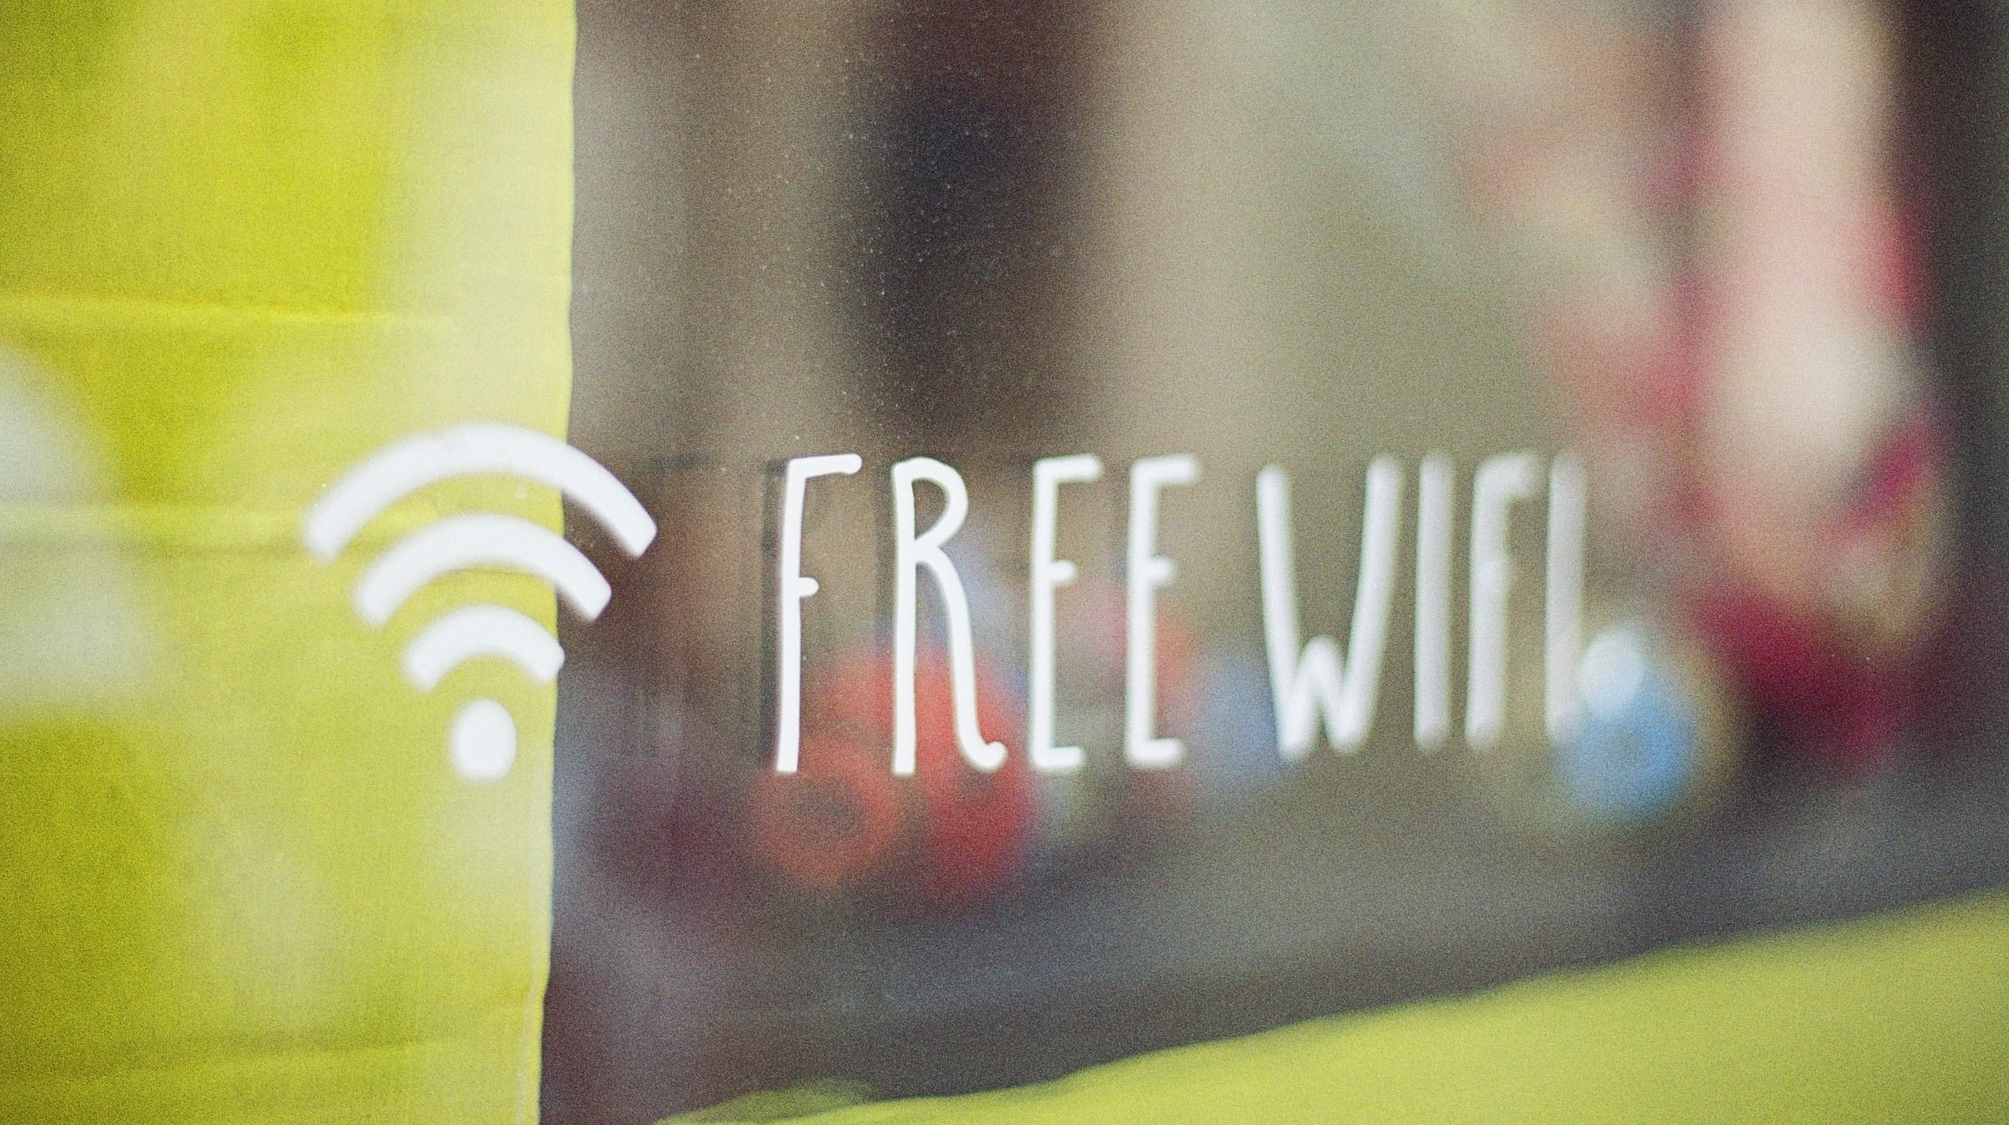 Image of a free WiFi sign